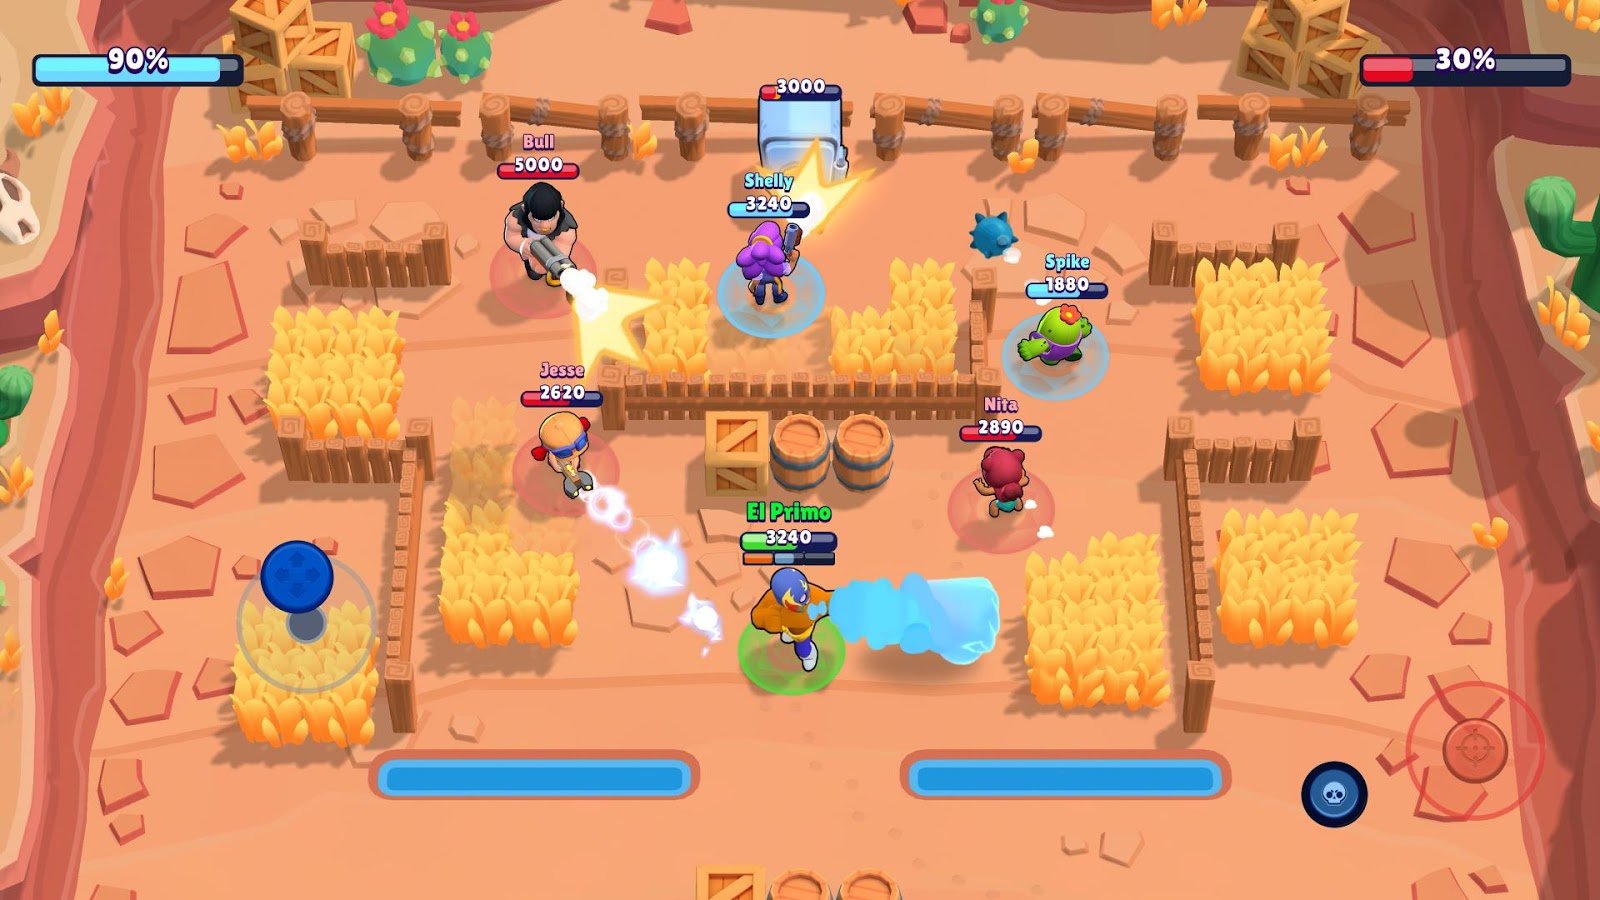 Brawl Stars Is Bite Sized Fun That Strips Away Too Much To Be Great South China Morning Post - brawl stars arene nita